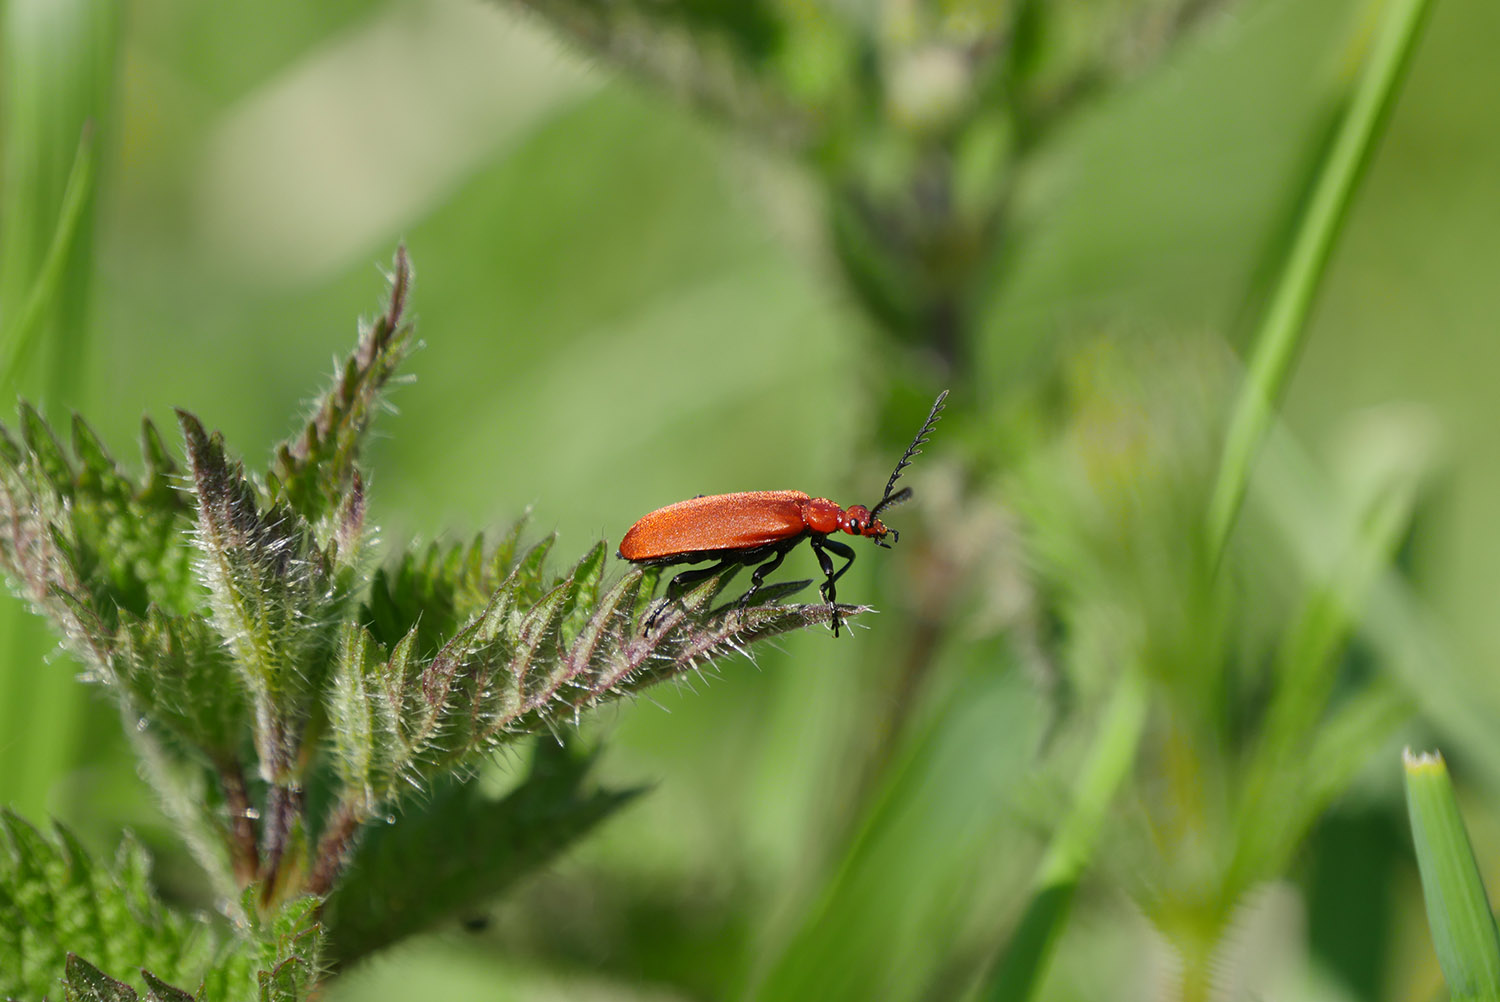 A black-headed cardinal beetle perched on a nettle leaf